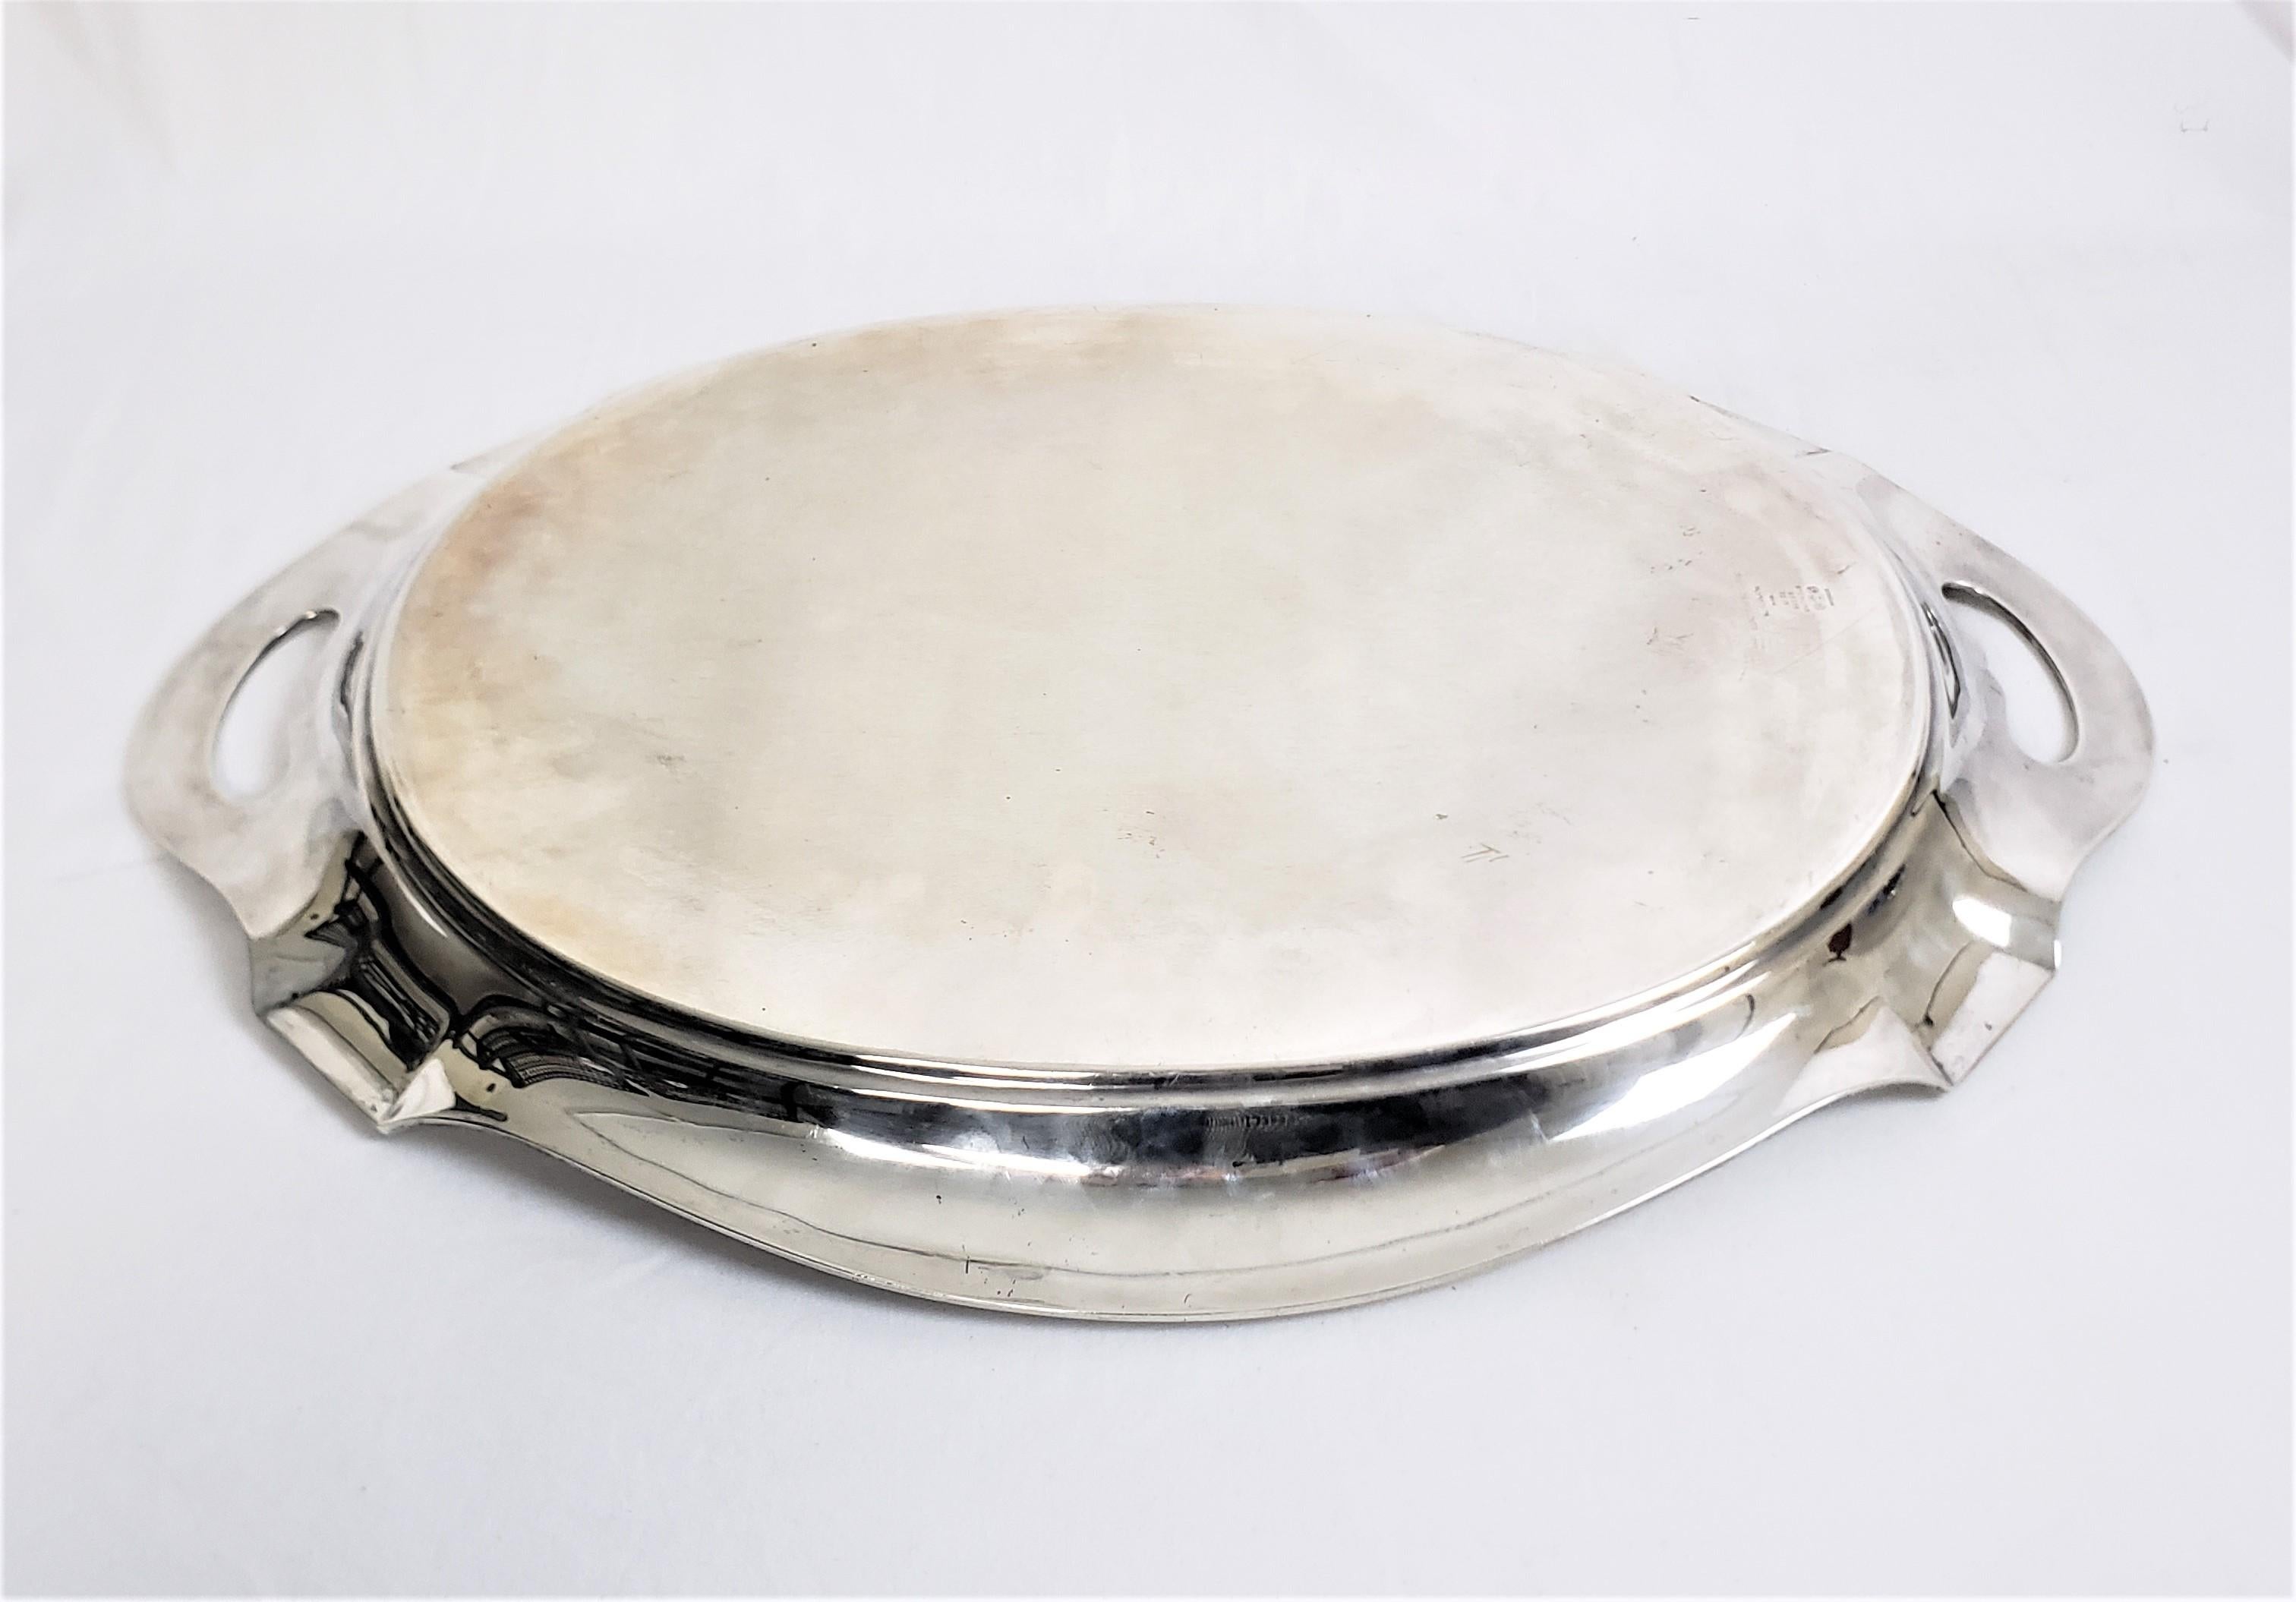 Antique Art Deco Gorham Large Oval Sterling Silver Serving Tray For Sale 1